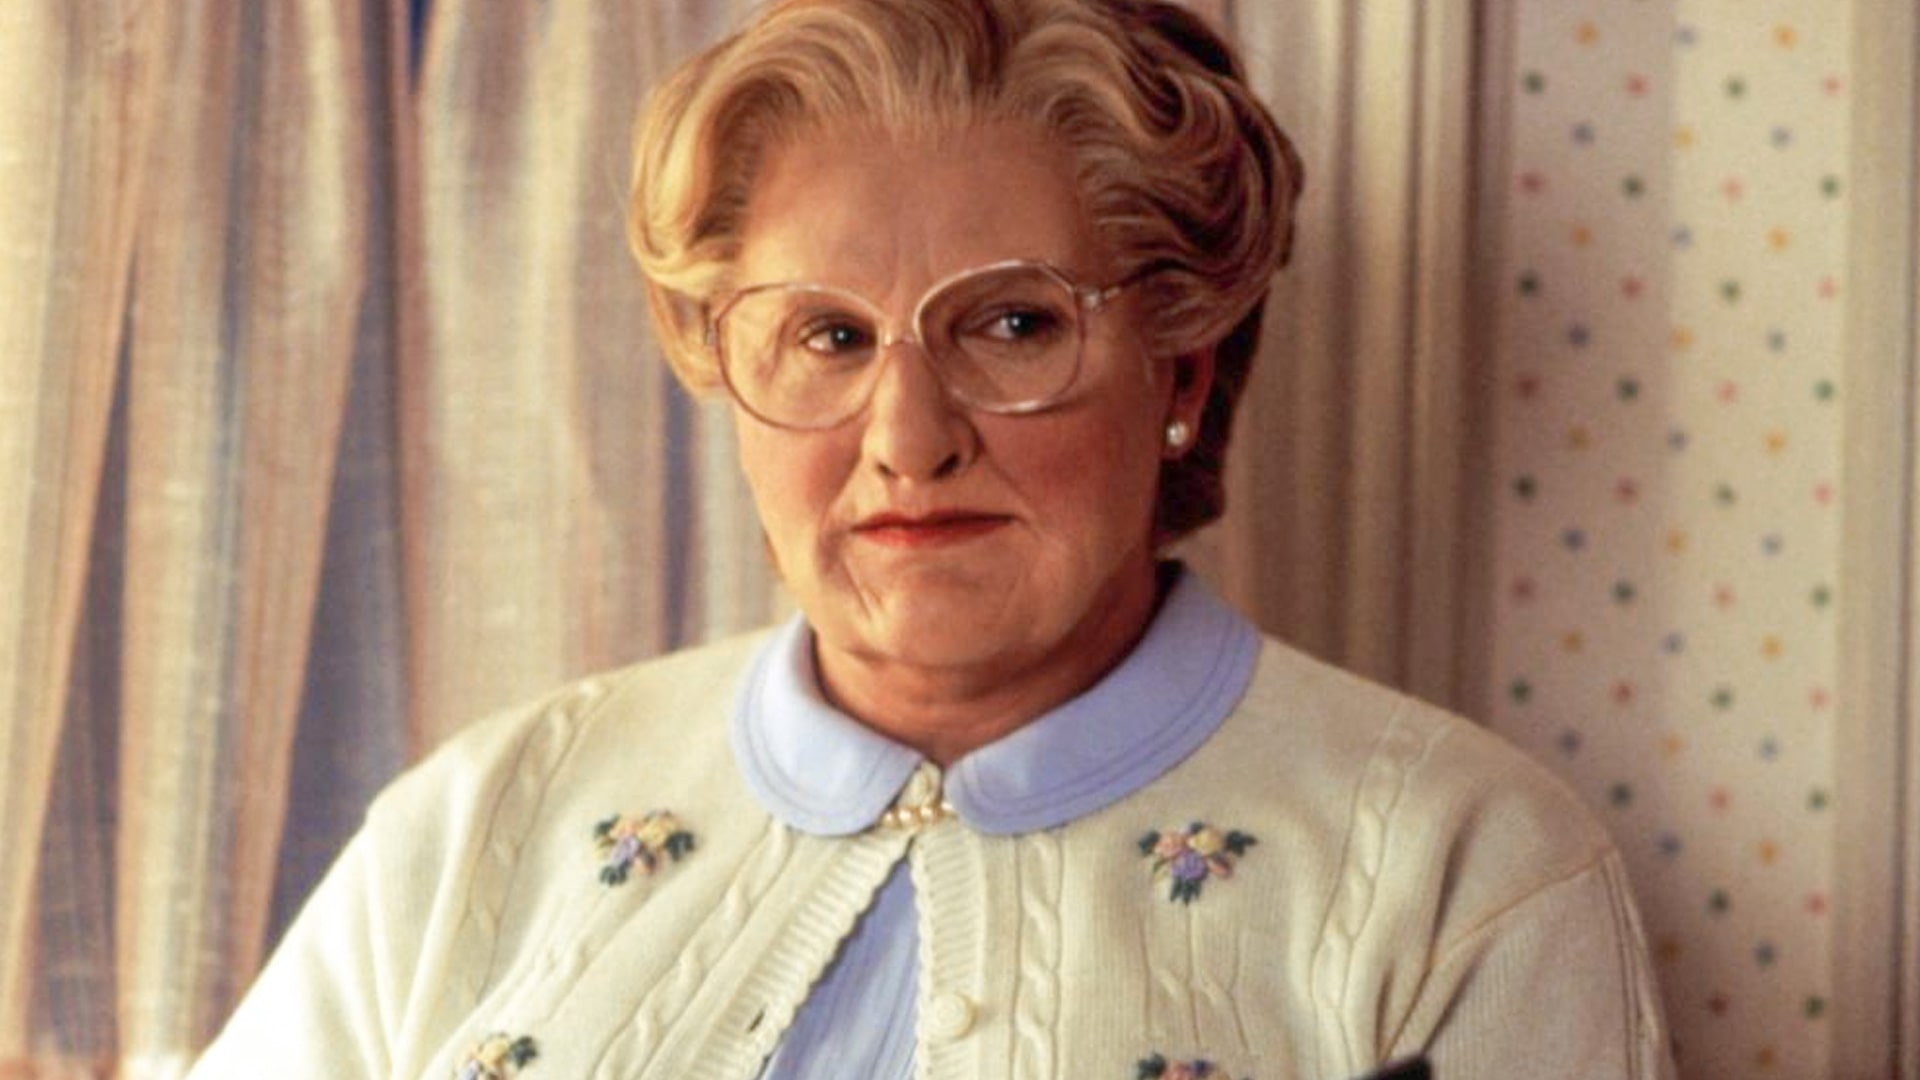 Mrs Doubtfire Movie - 30 Mrs Doubtfire (1993) Movie Facts You Haven't Read Before